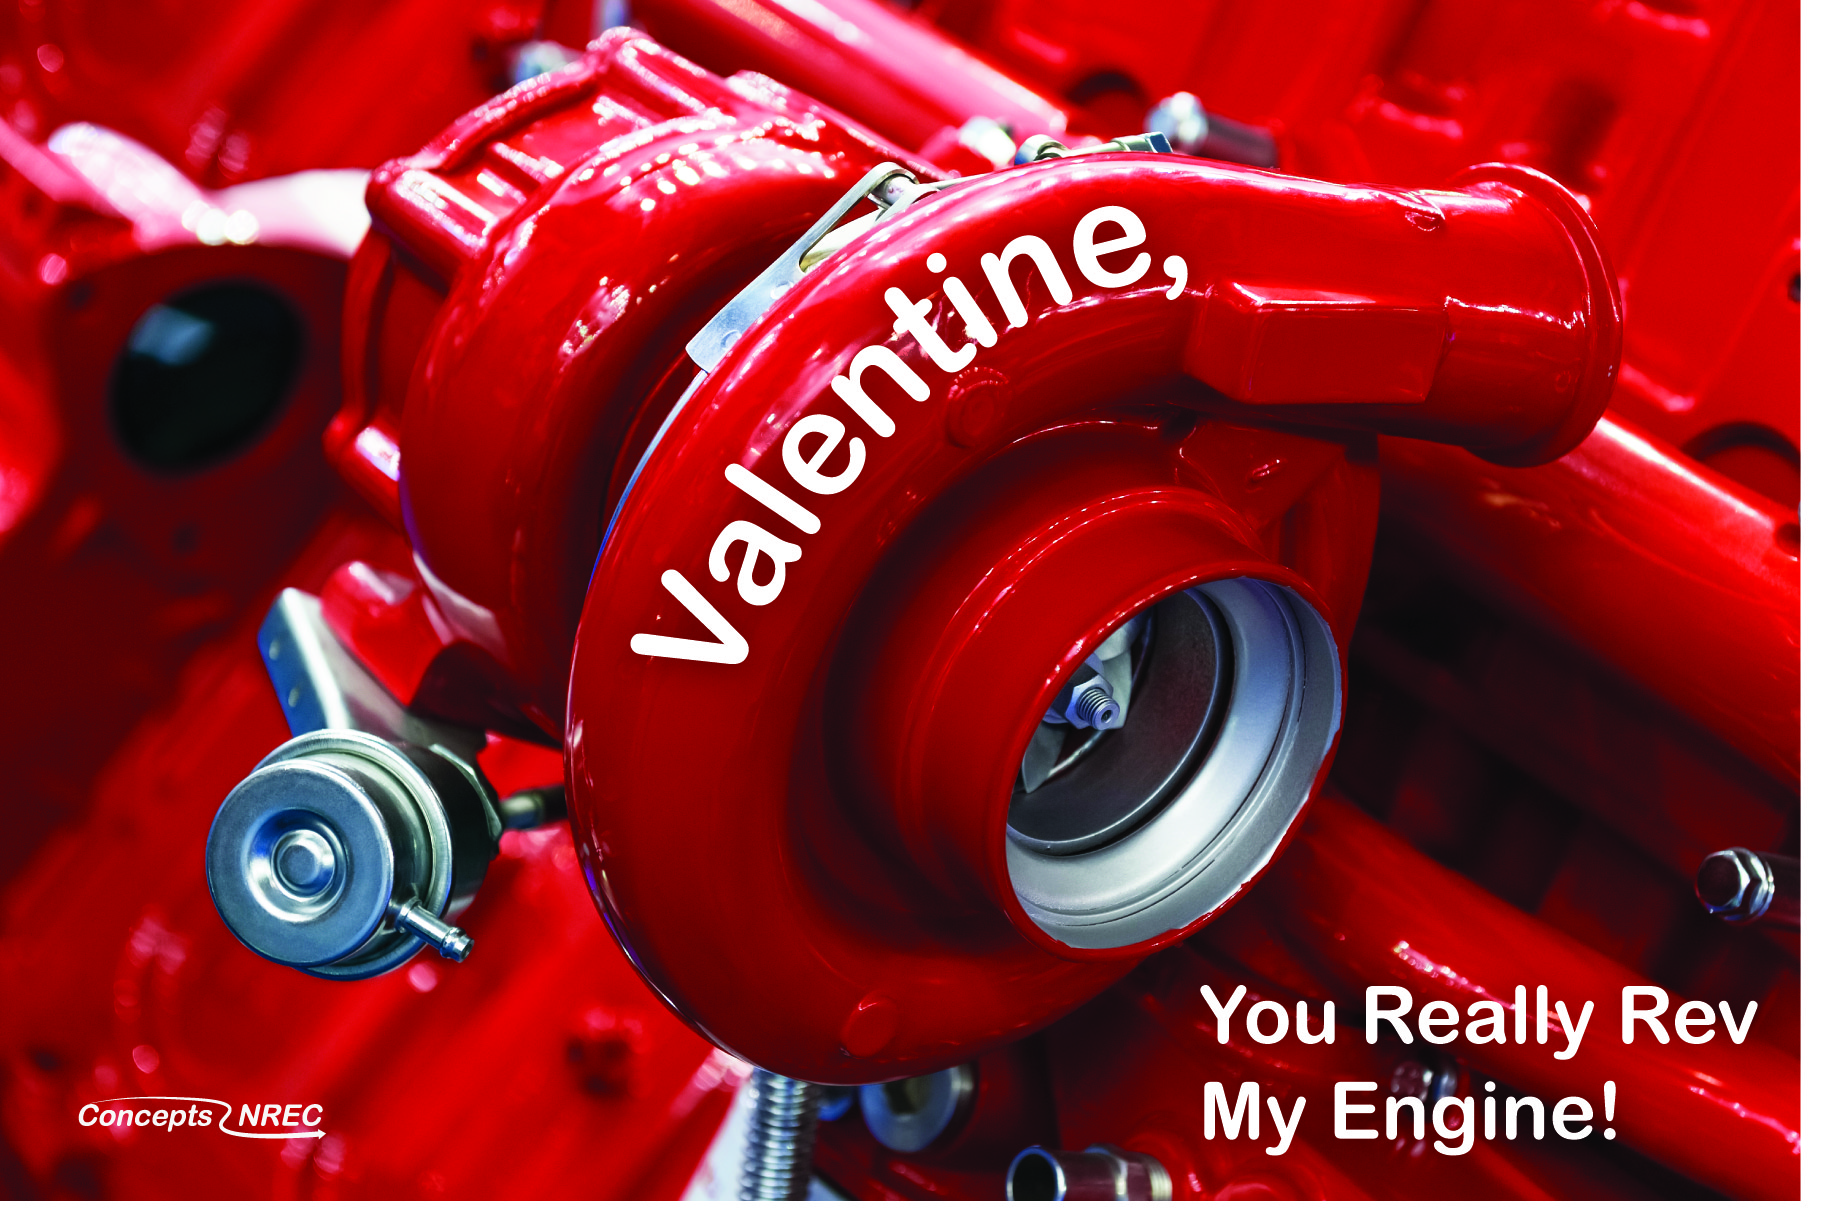 7 Turbomachinery Themed Valentine’s Day Cards – Which is Your Favorite?